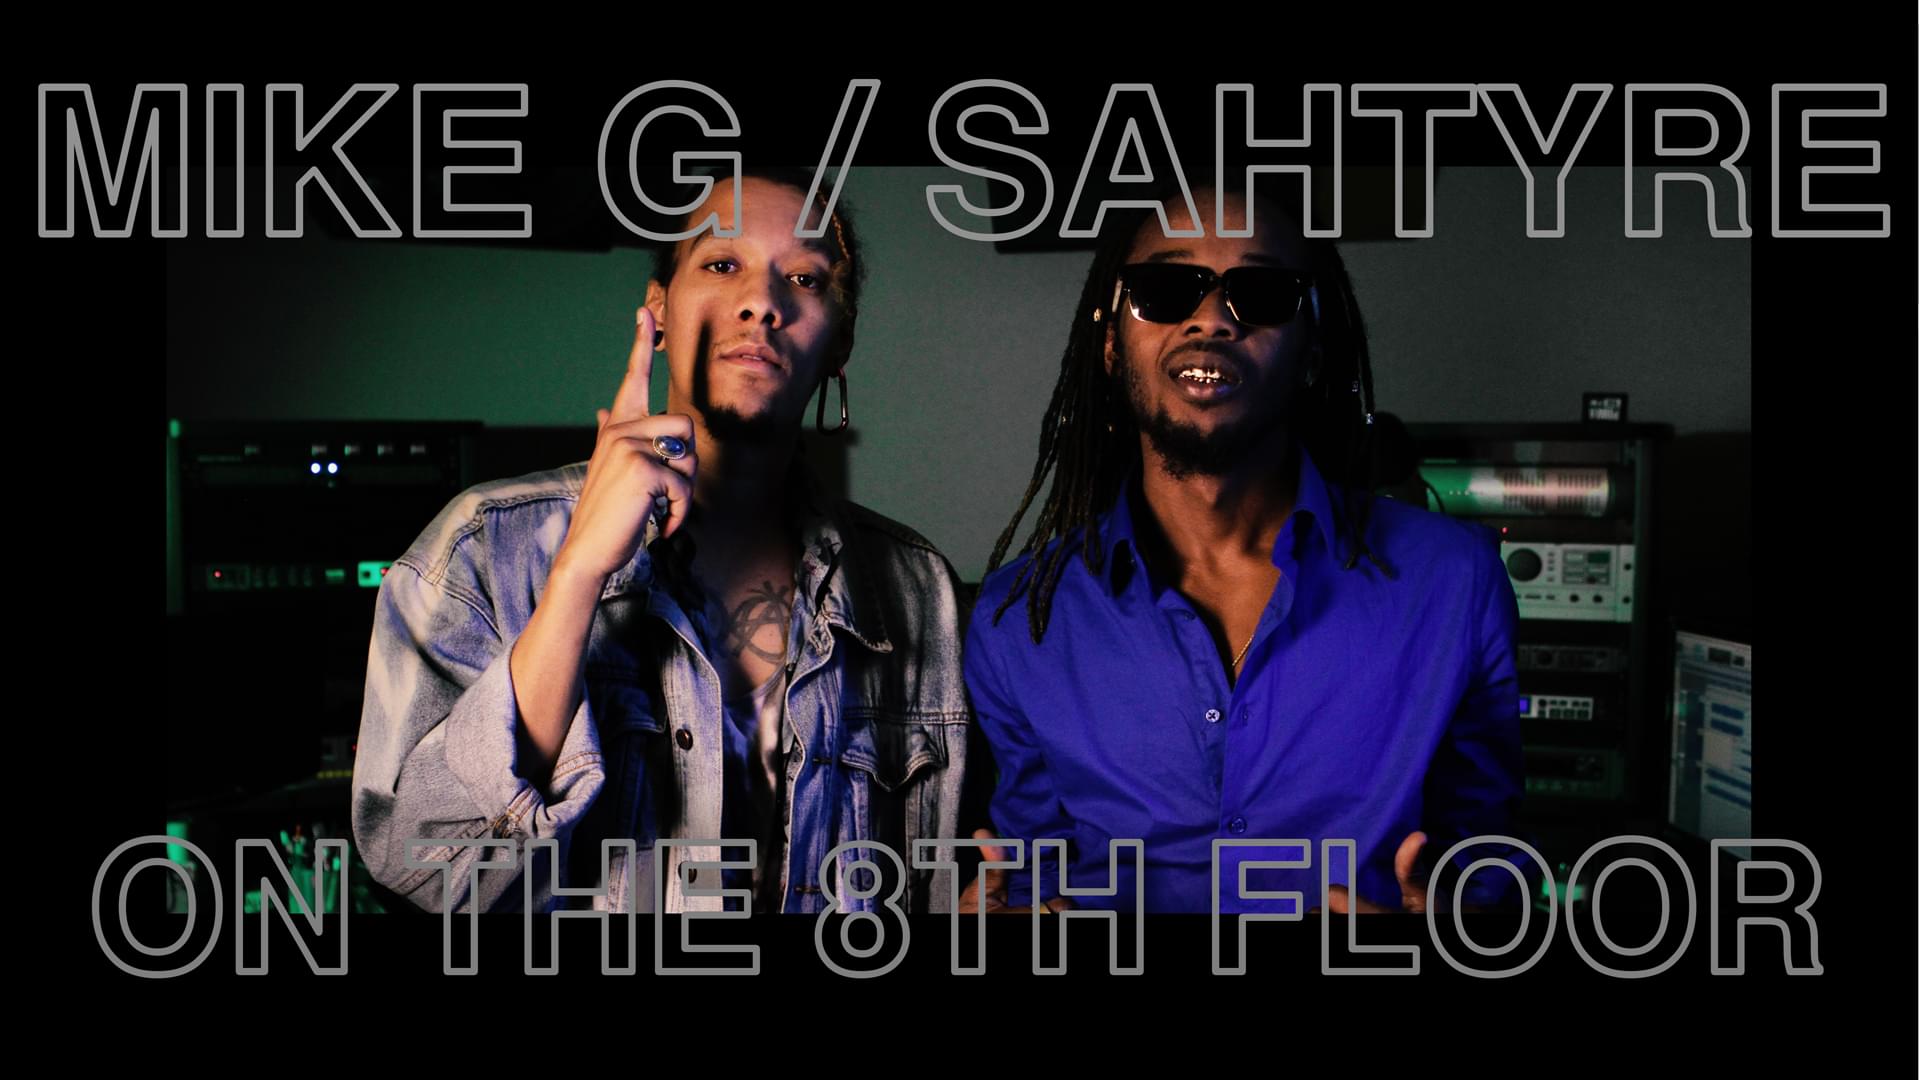 Mike G Feat. Sahtyre “Ruin Your Day” LIVE l On The 8th Floor